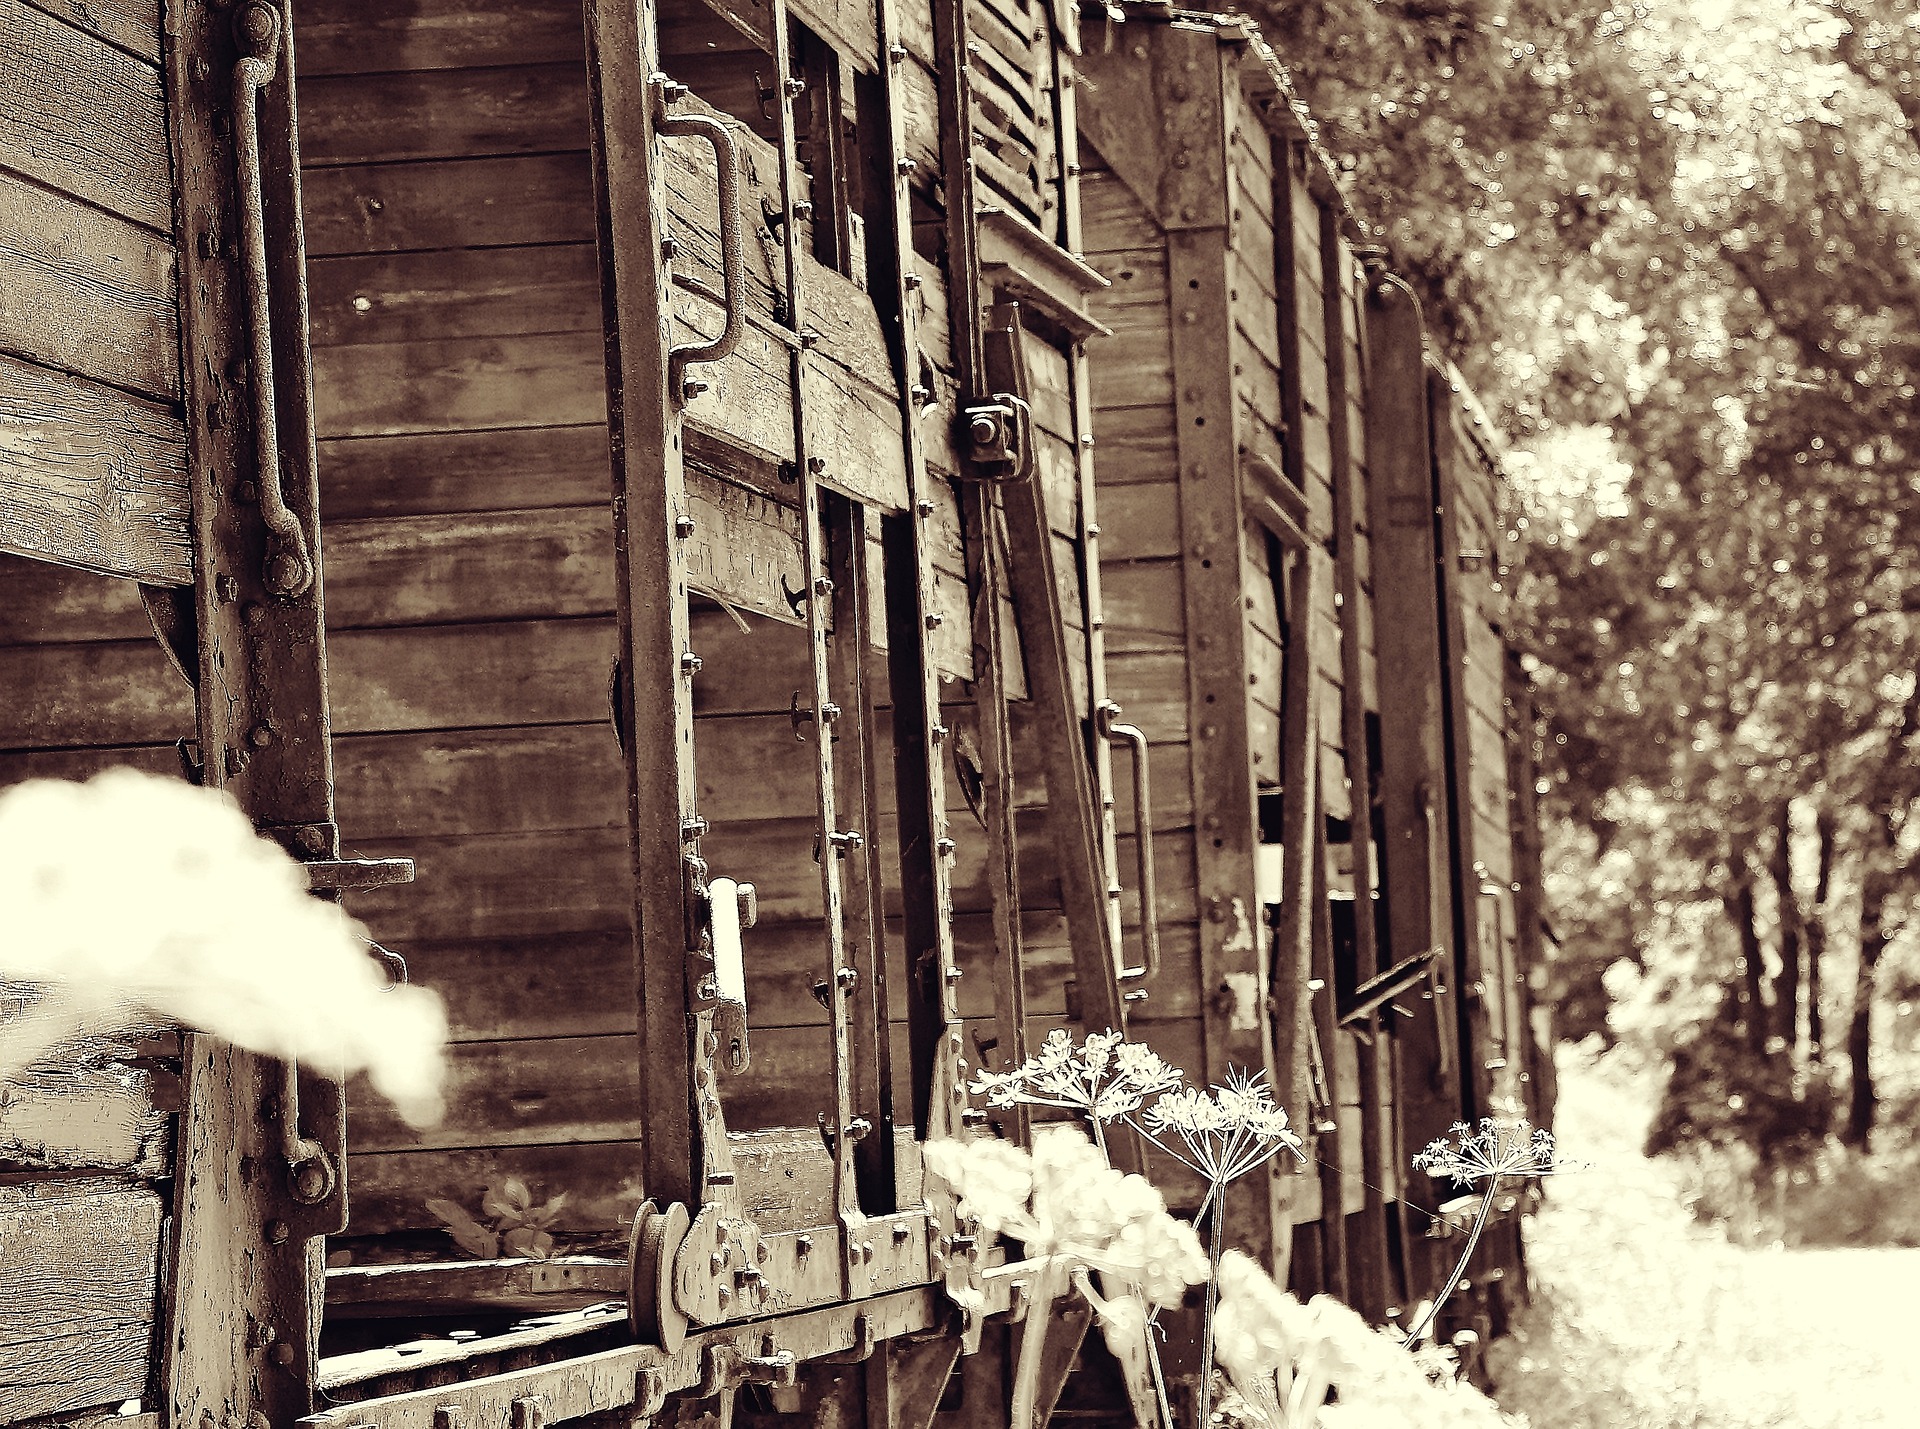 Train from 1880's